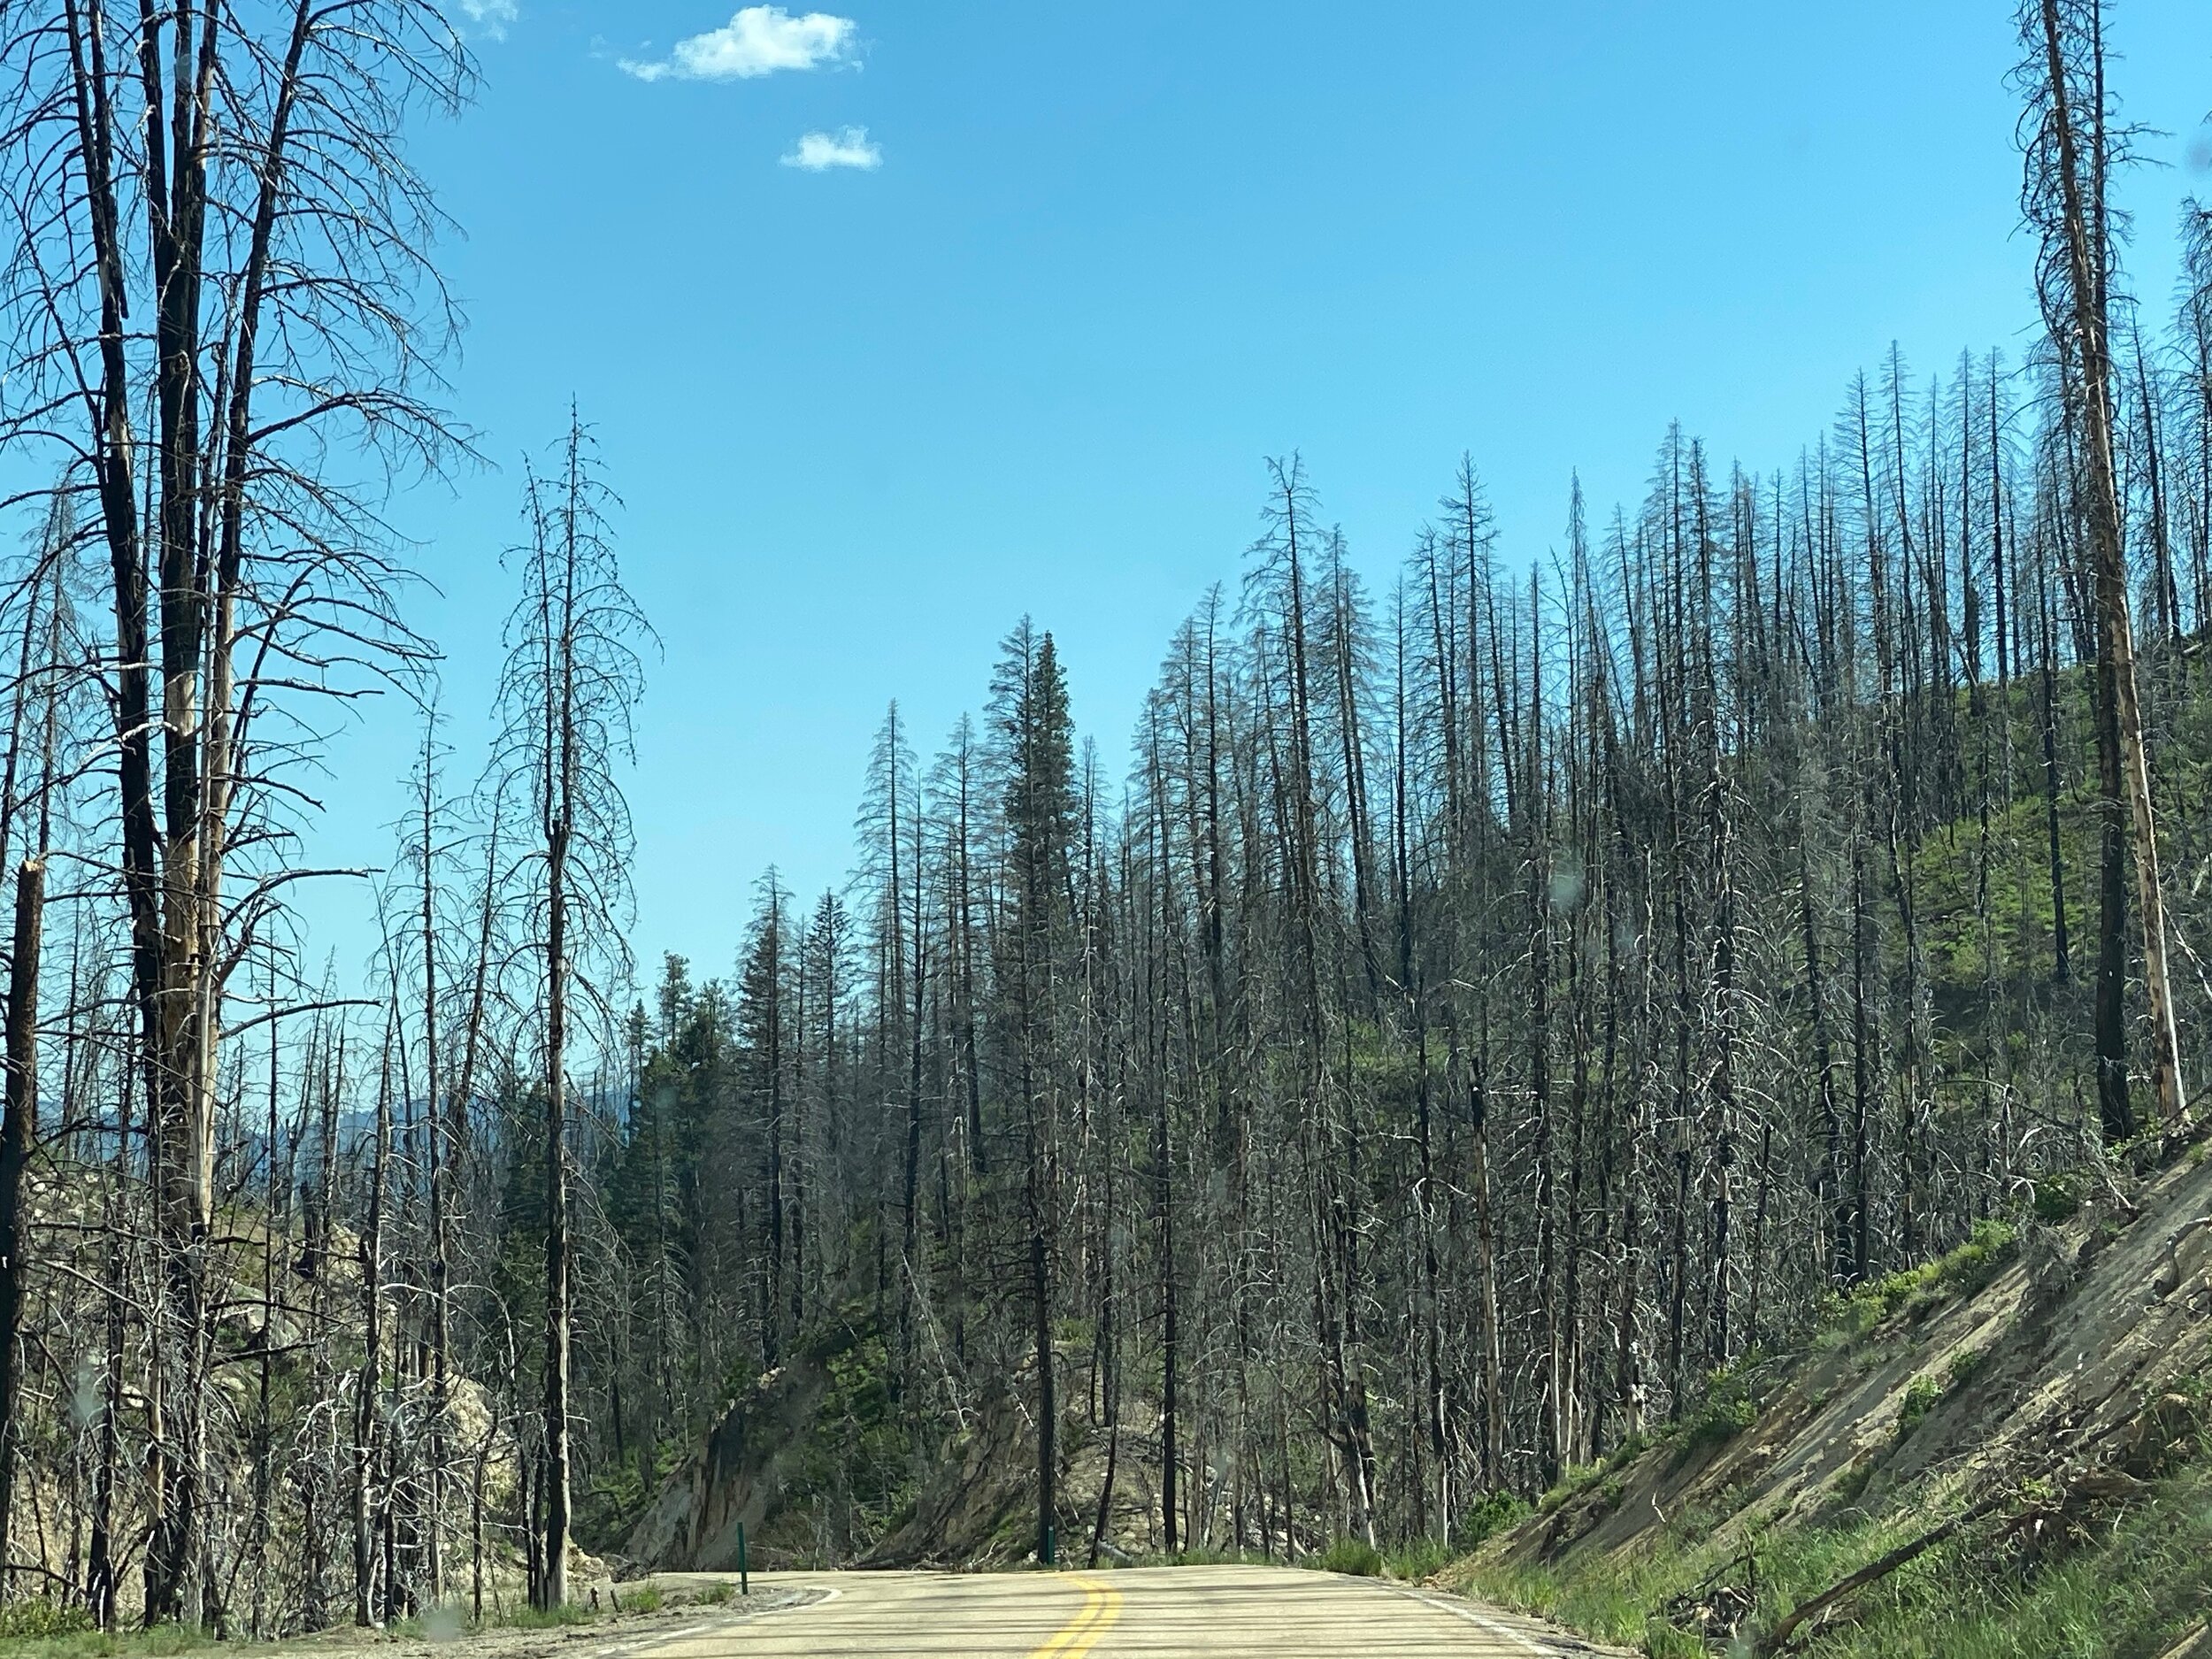 Lots of fire damage in the Sawtooth Mountains, Idaho.  Photo by Karen Boudreaux, June 3, 2021